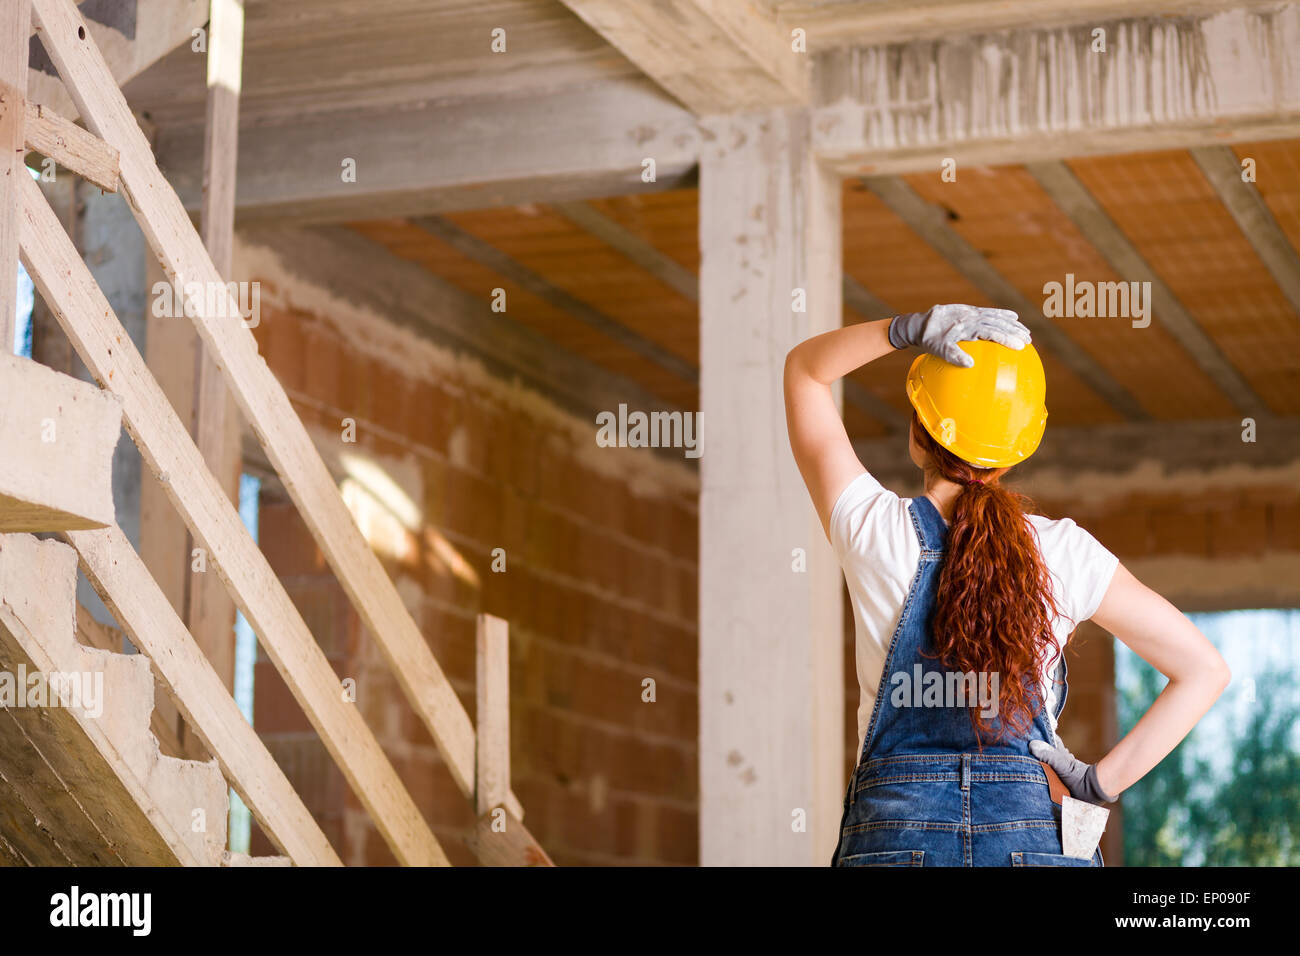 Woman Bricklayer with Overalls and Helmet Watching Upstairs Stock Photo